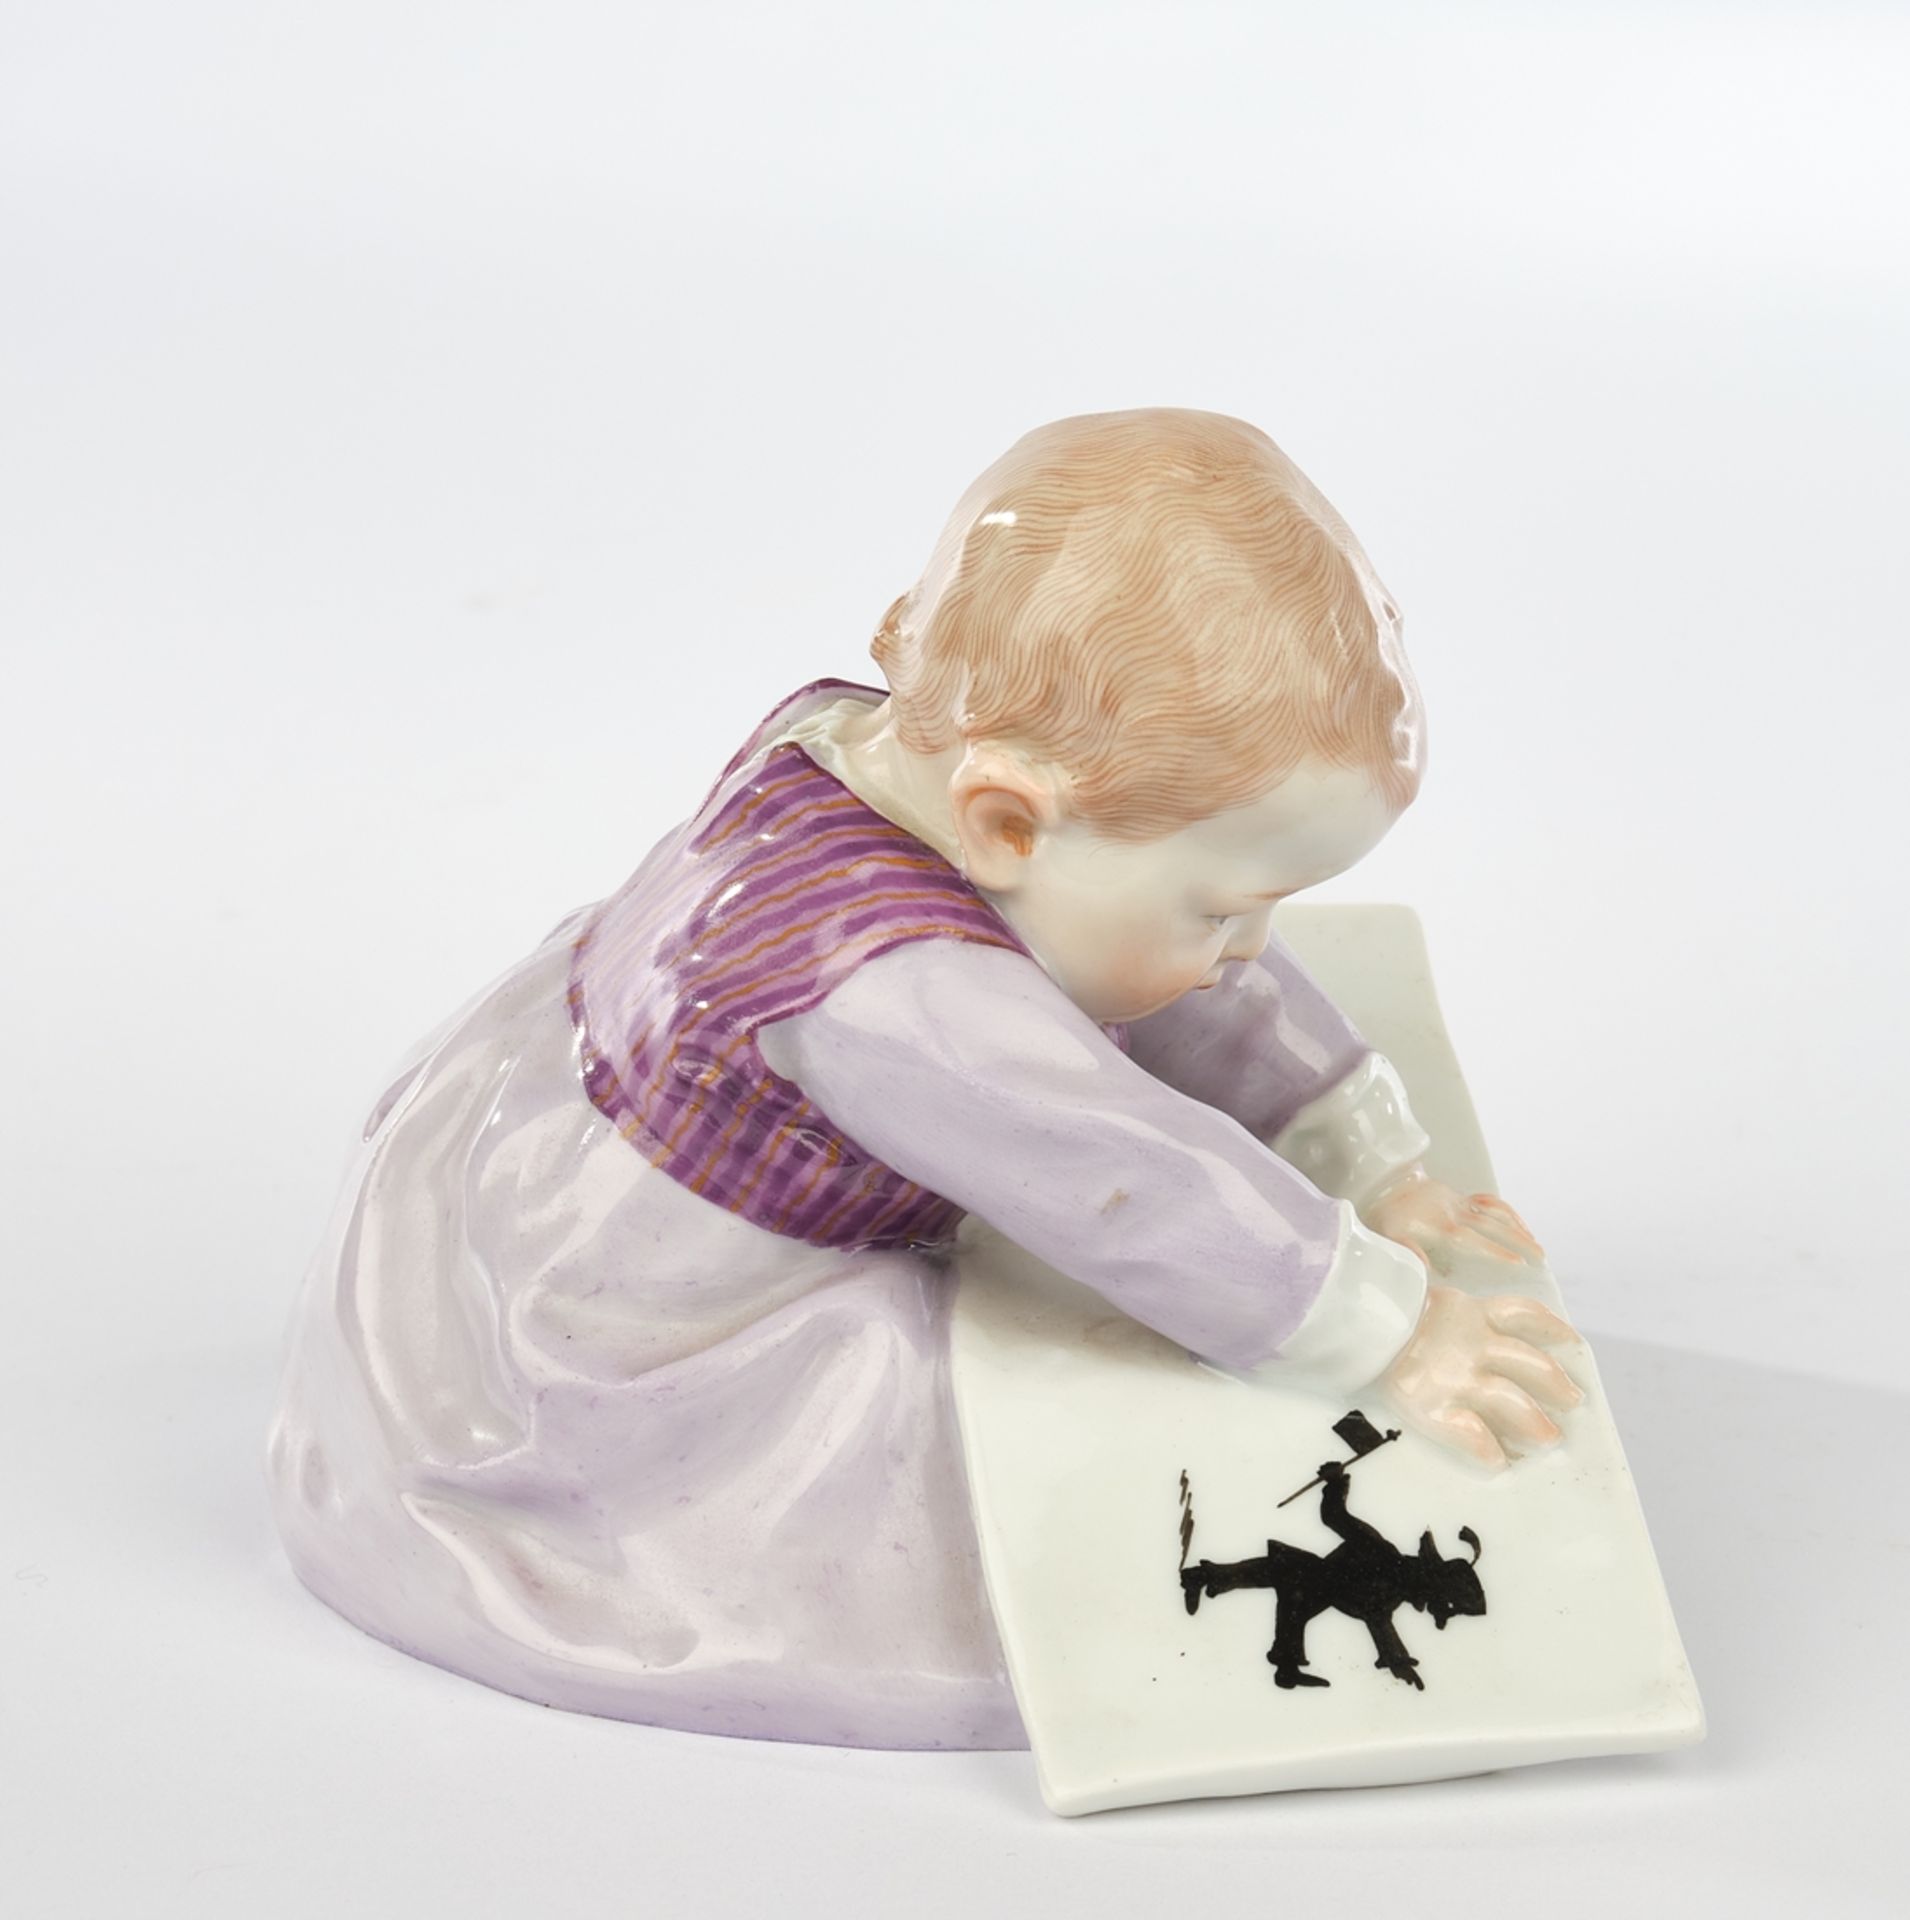 Porcelain figurine, , "Child with picture book, large", Meissen, sword mark, 1904-1924, 1st choice, - Image 3 of 5